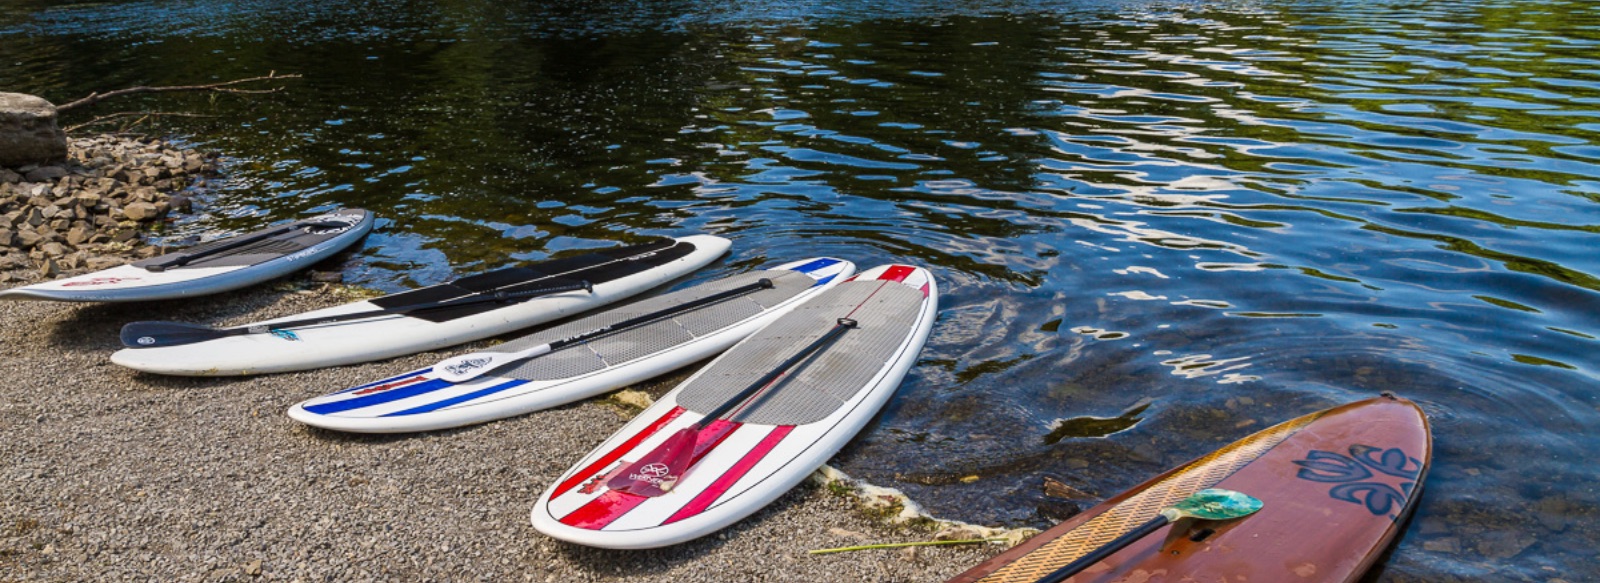 Paddleboards sitting on the shore of a lake